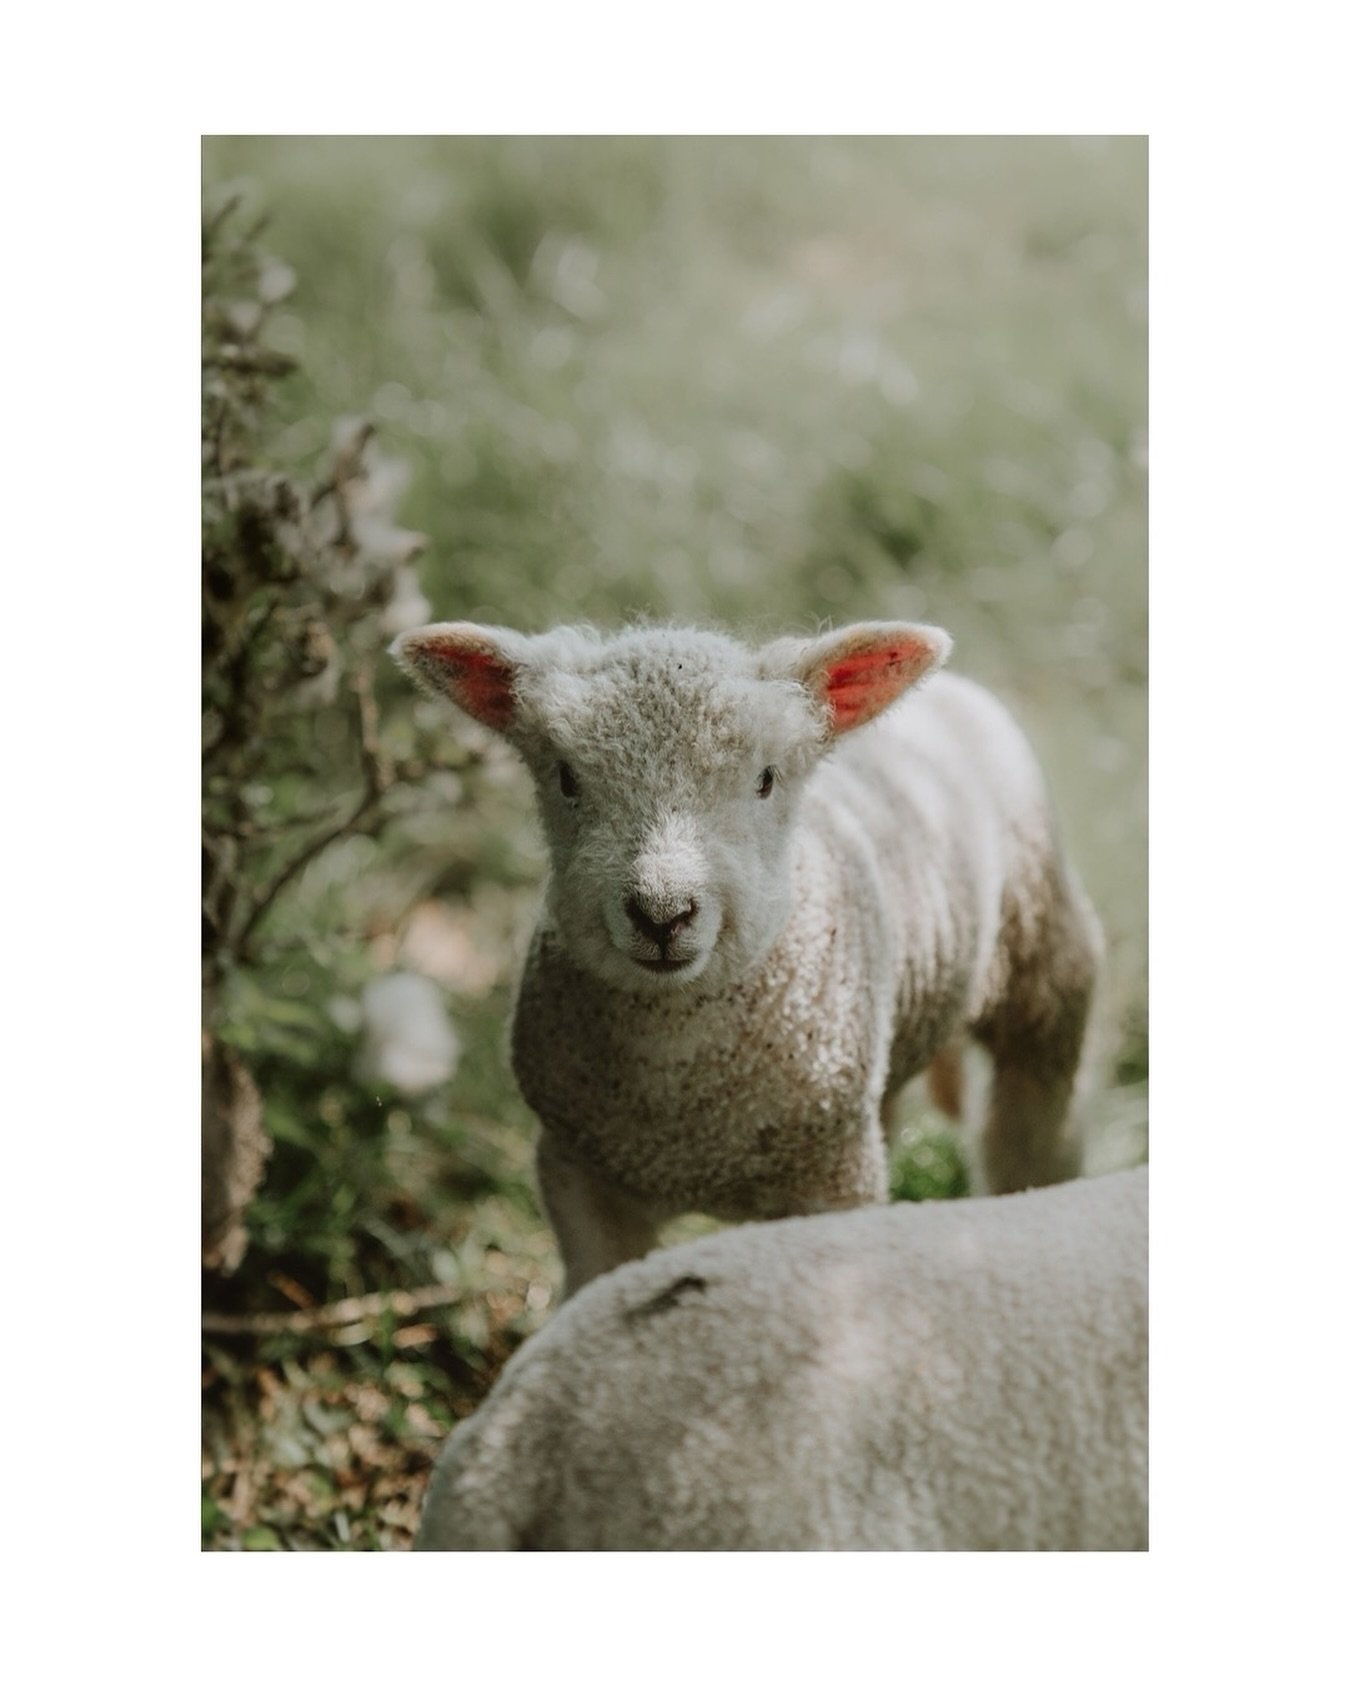 Sweet faces on travels for @fablefaine this week&hellip;

#lambs #springtime #countrysideliving #countrysidephotography